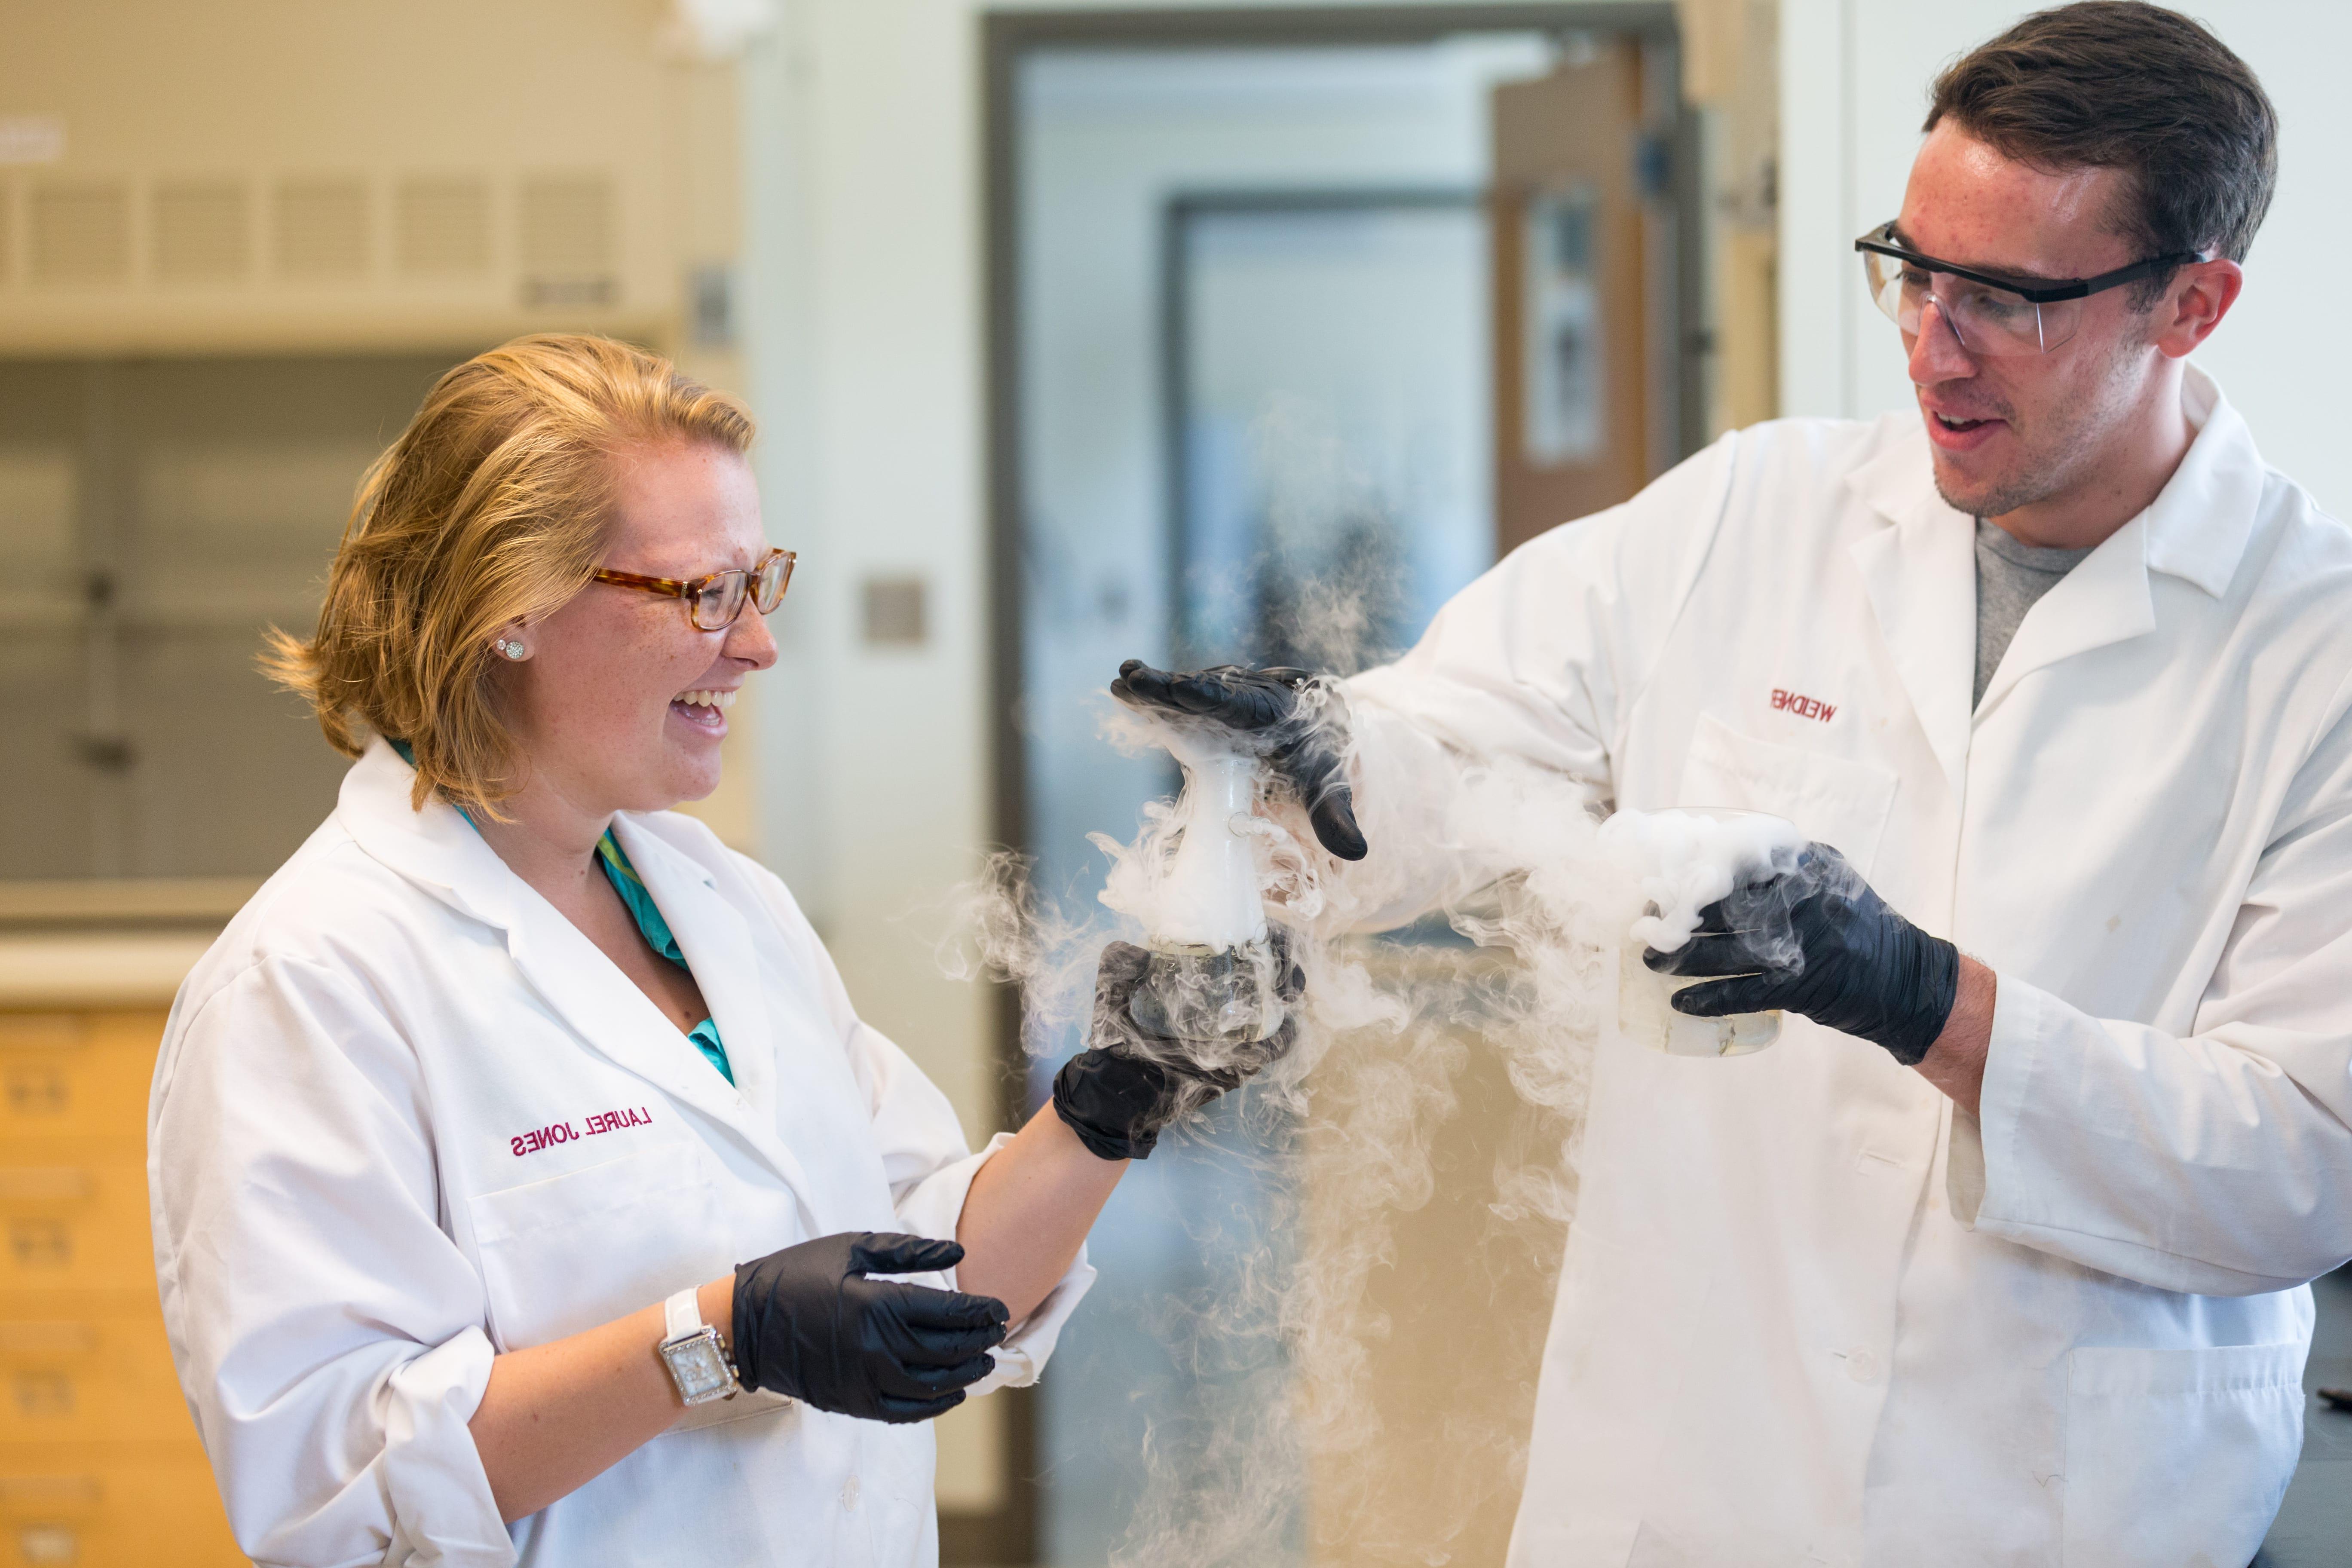 Two John S. Toll Fellows have some fun in the lab for their summer research